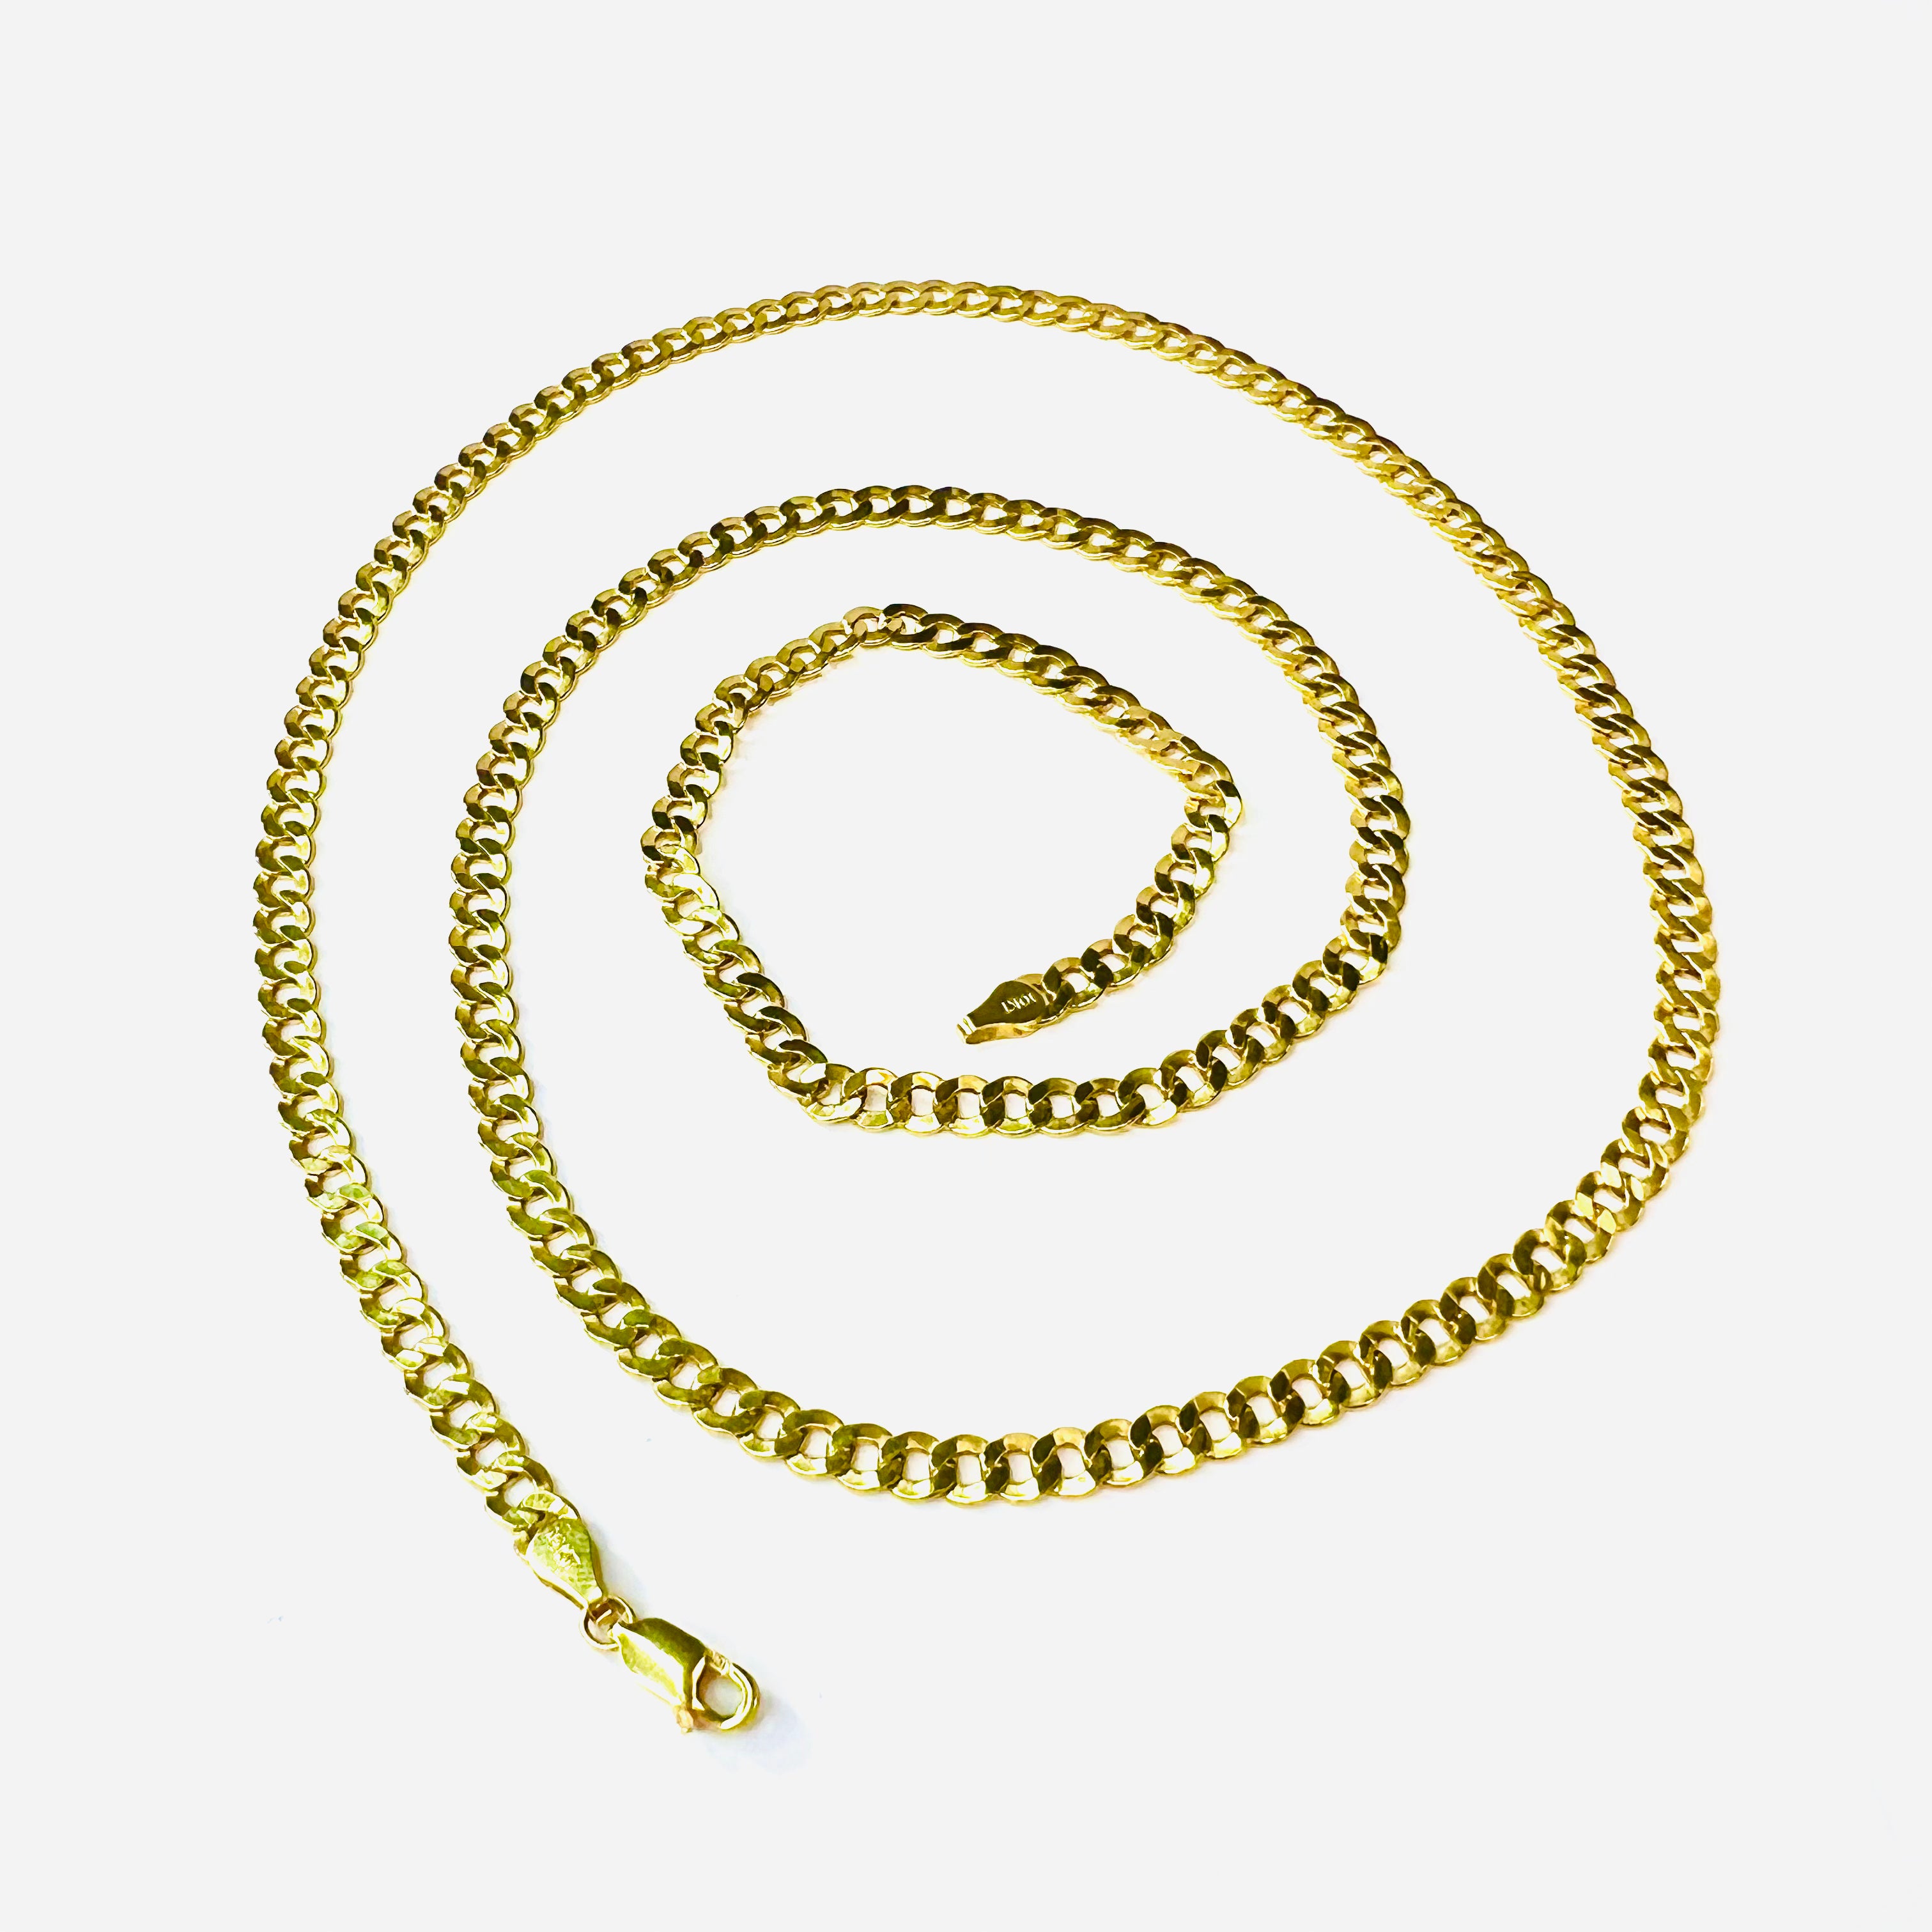 28" 4.5mm 10K Yellow Gold Cuban Link Chain Necklace